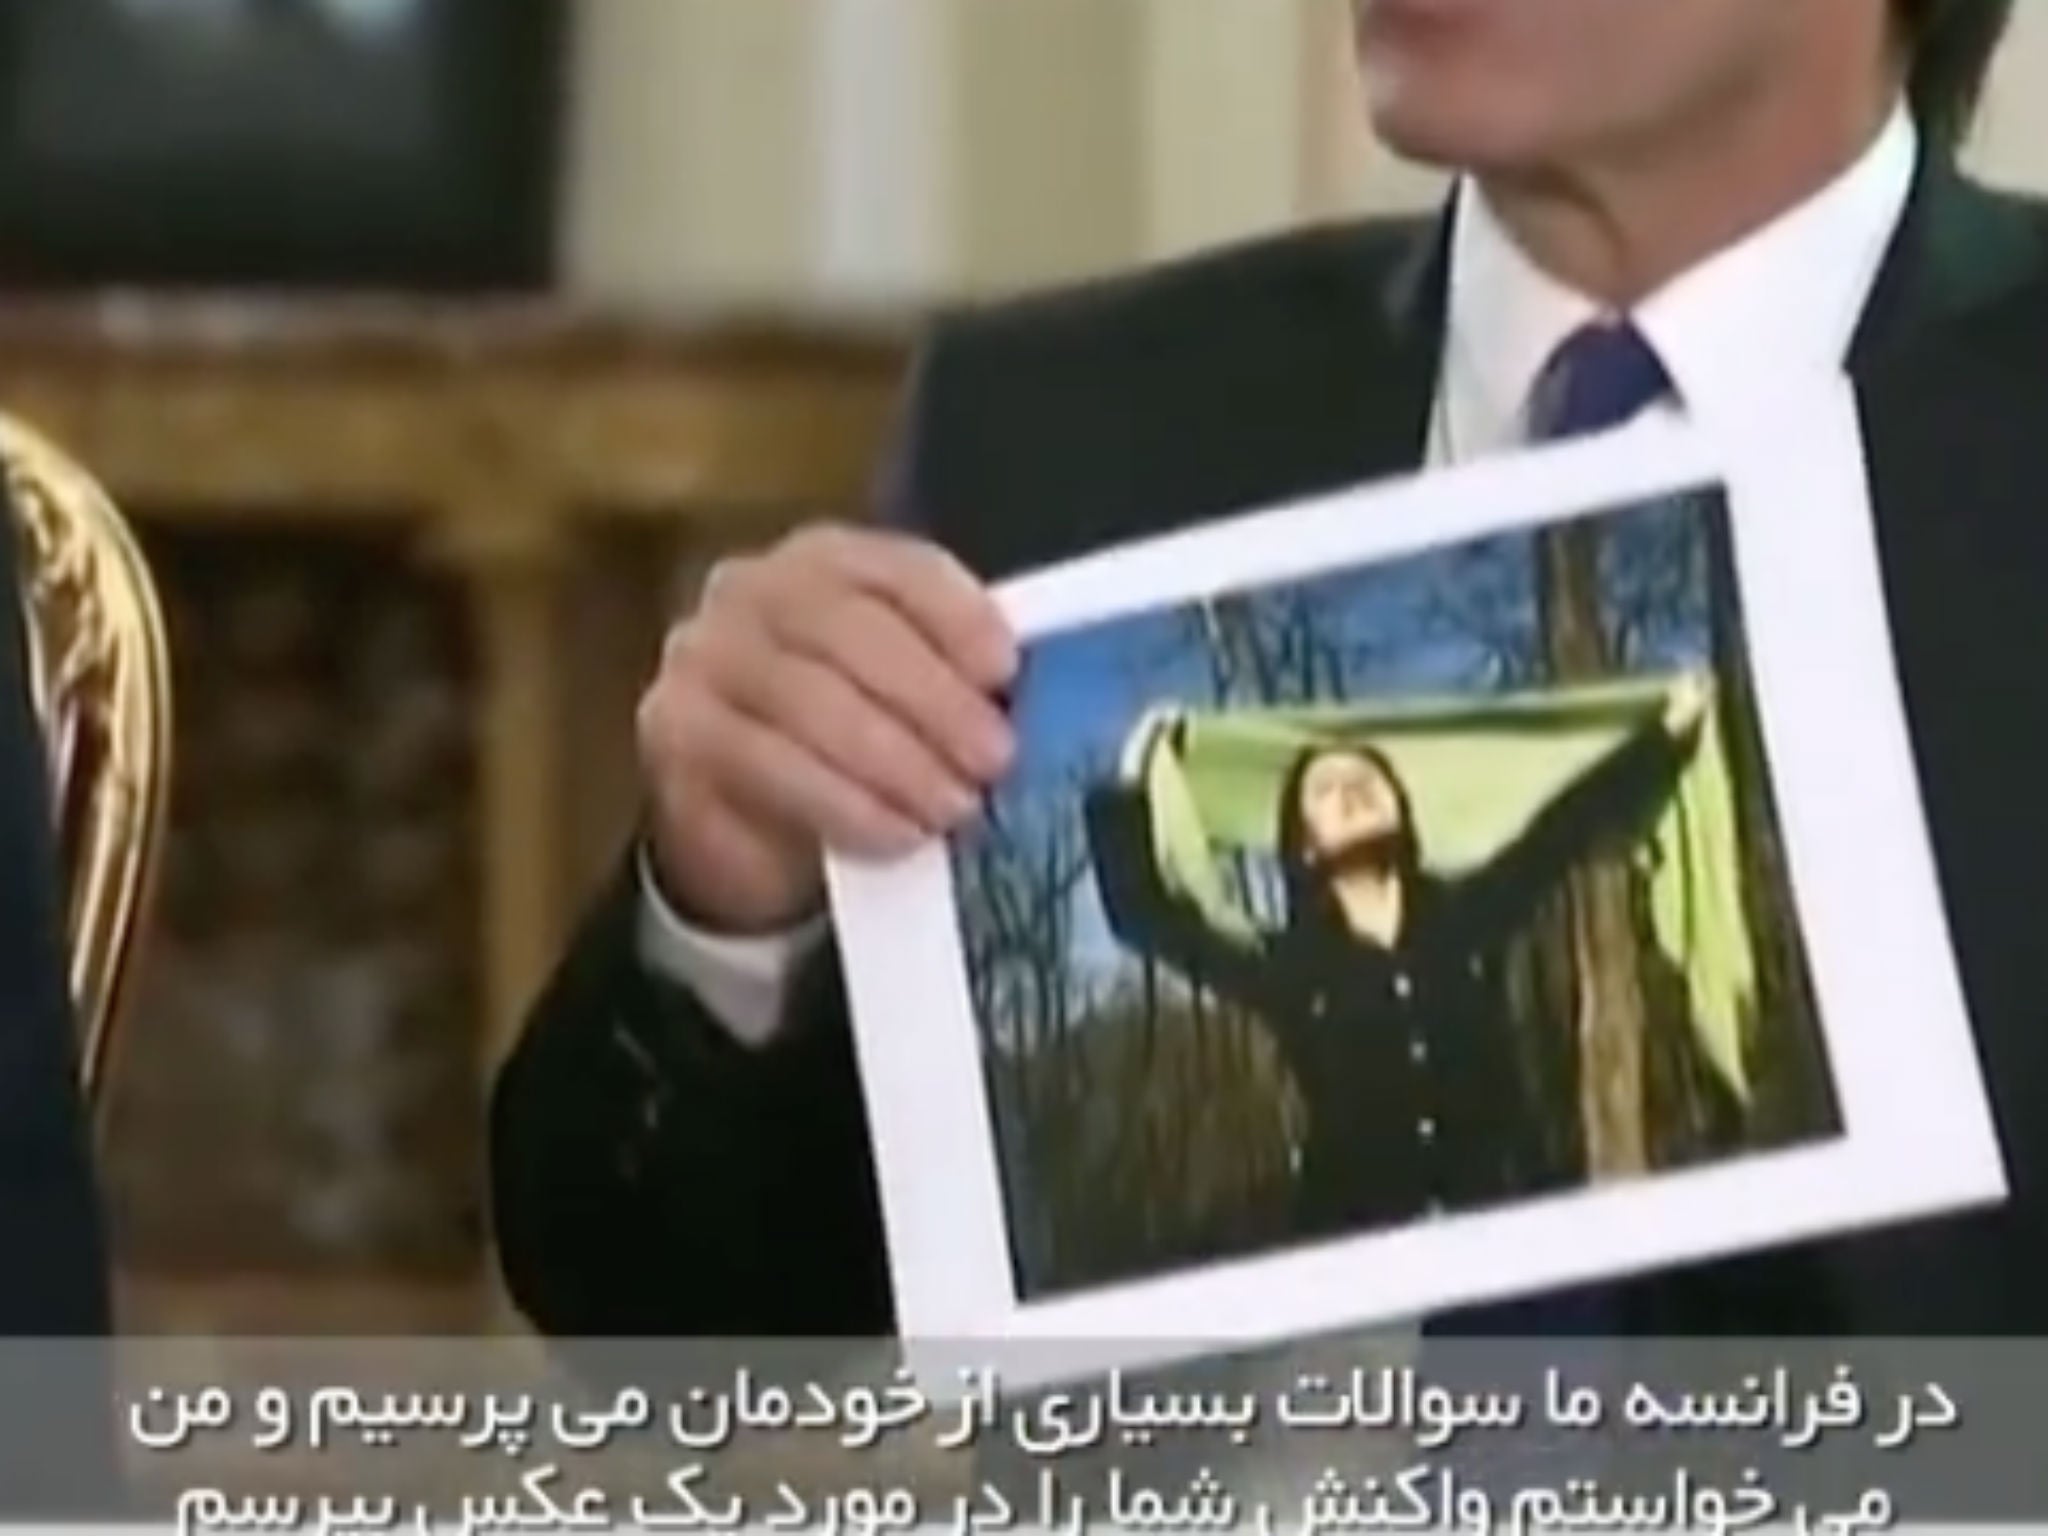 A journalist shows Rouhani the image